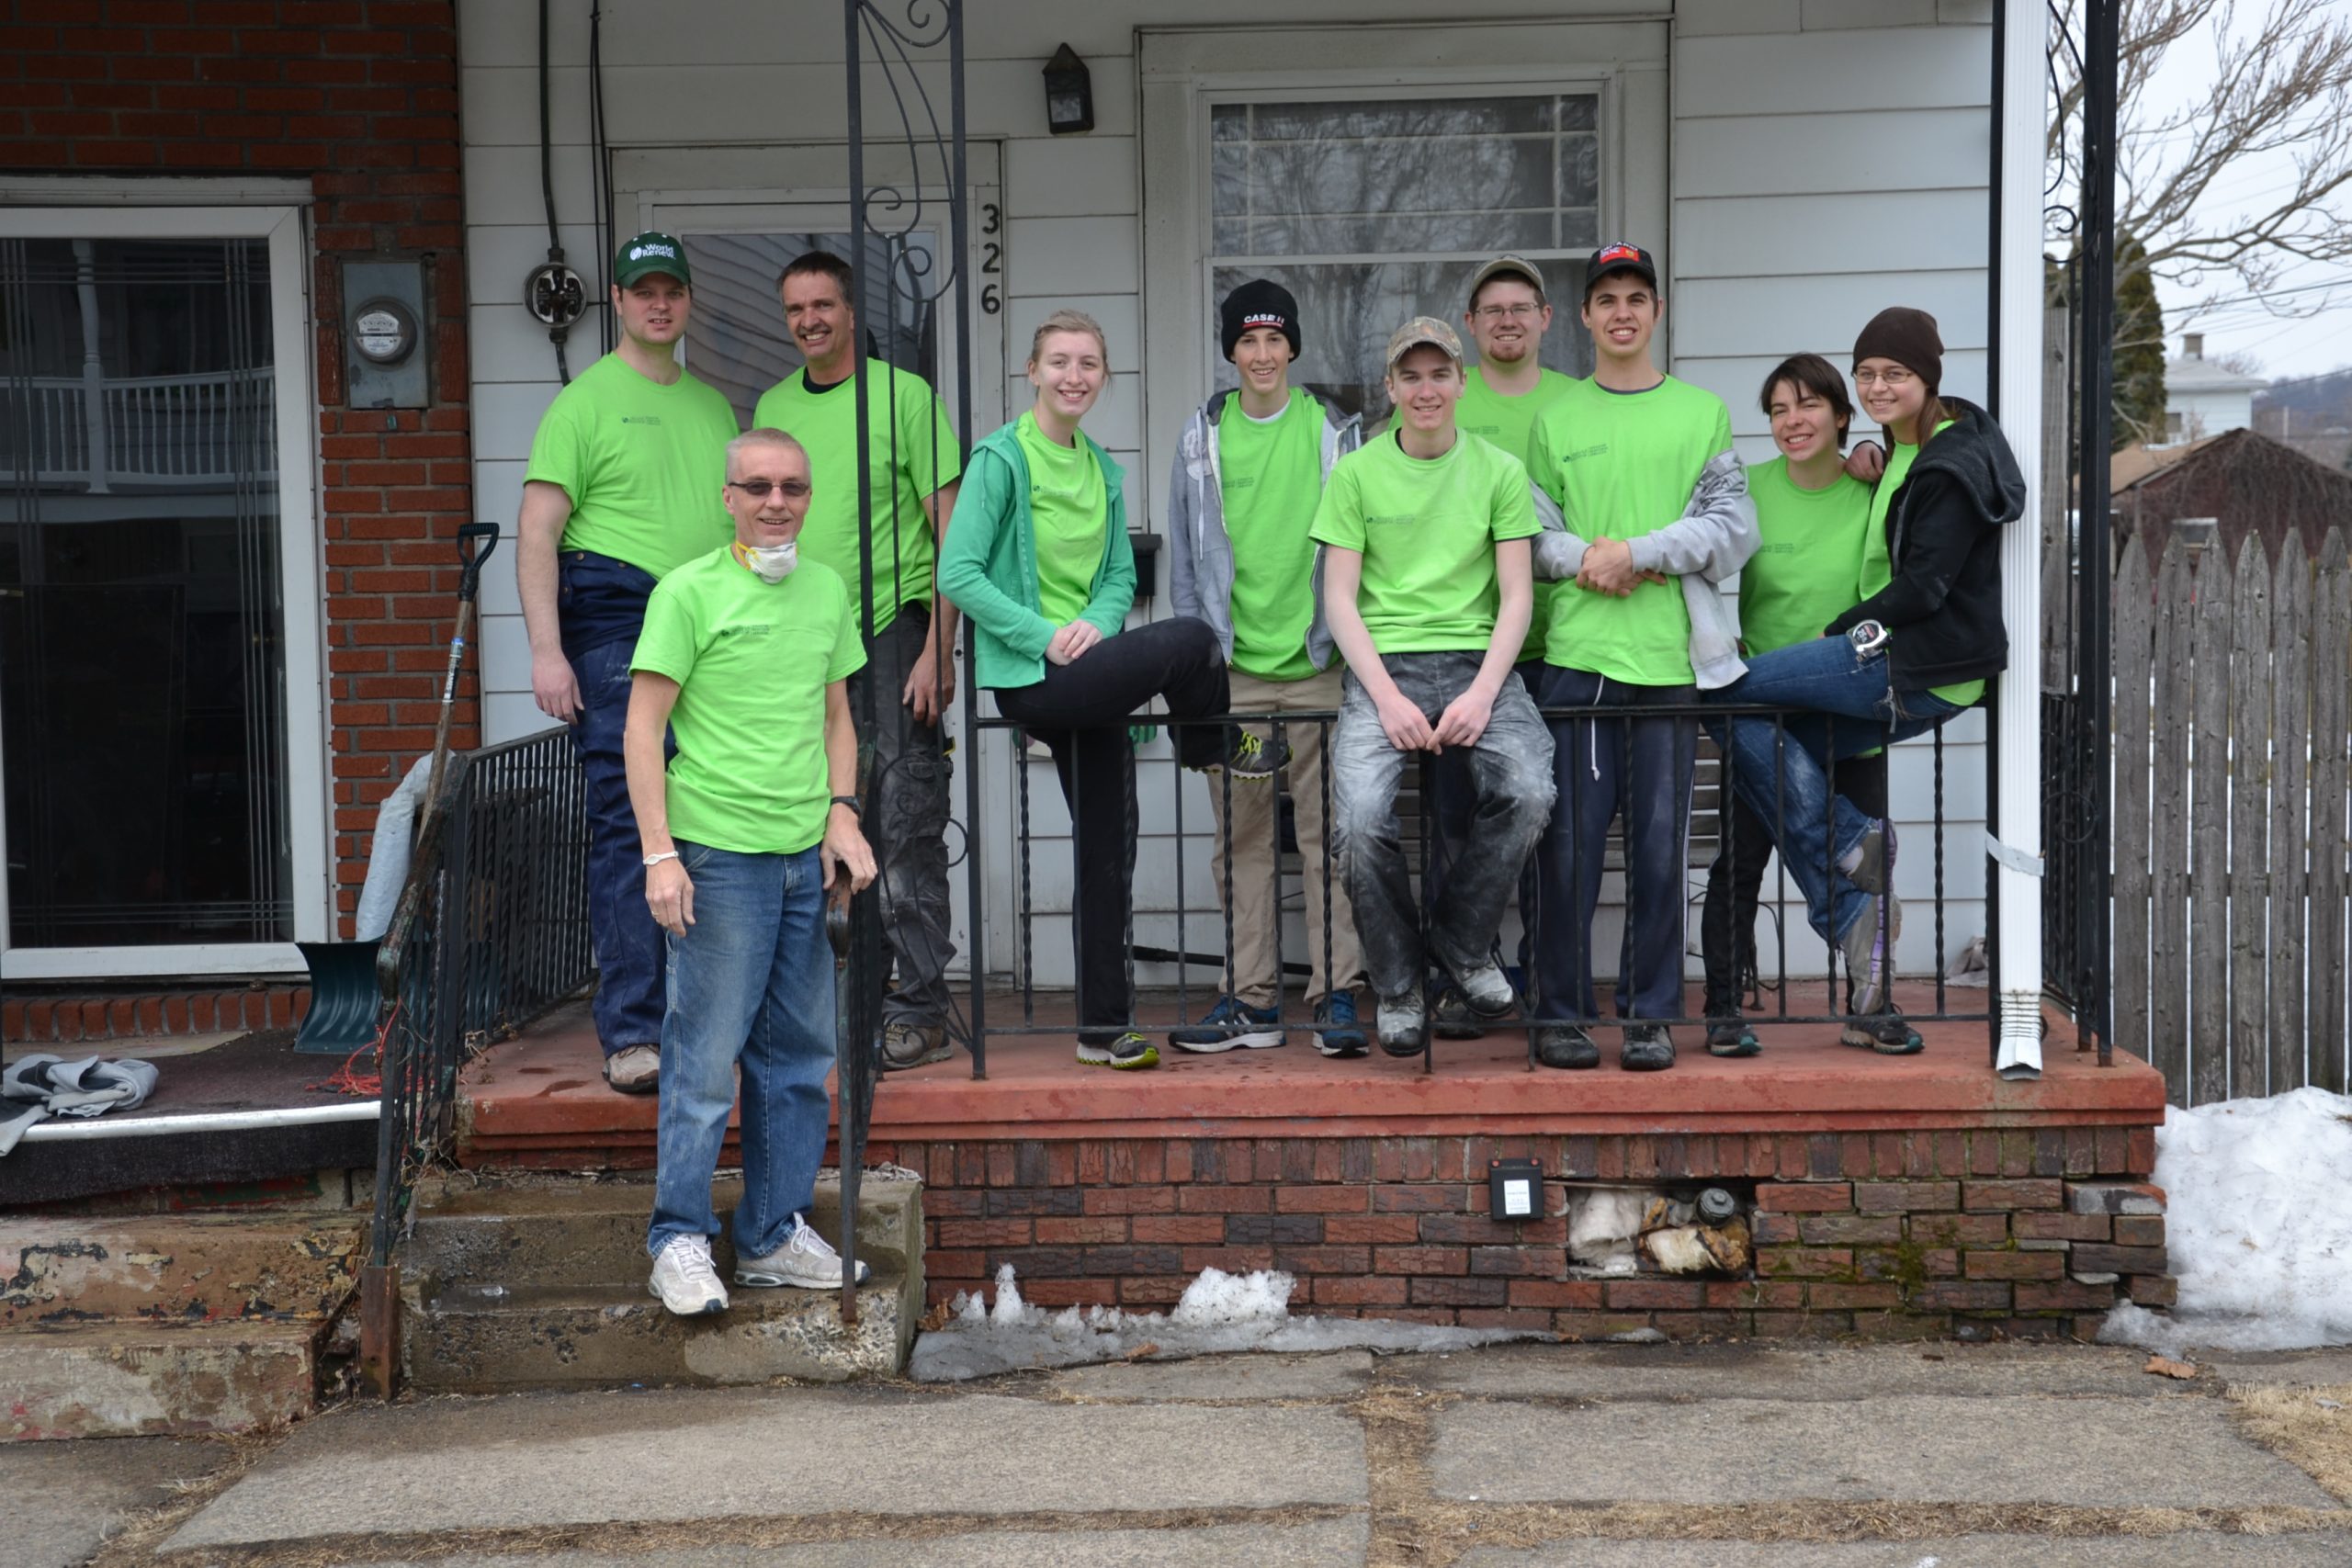 A group of volunteers in green T-shirts pose during a service trip.